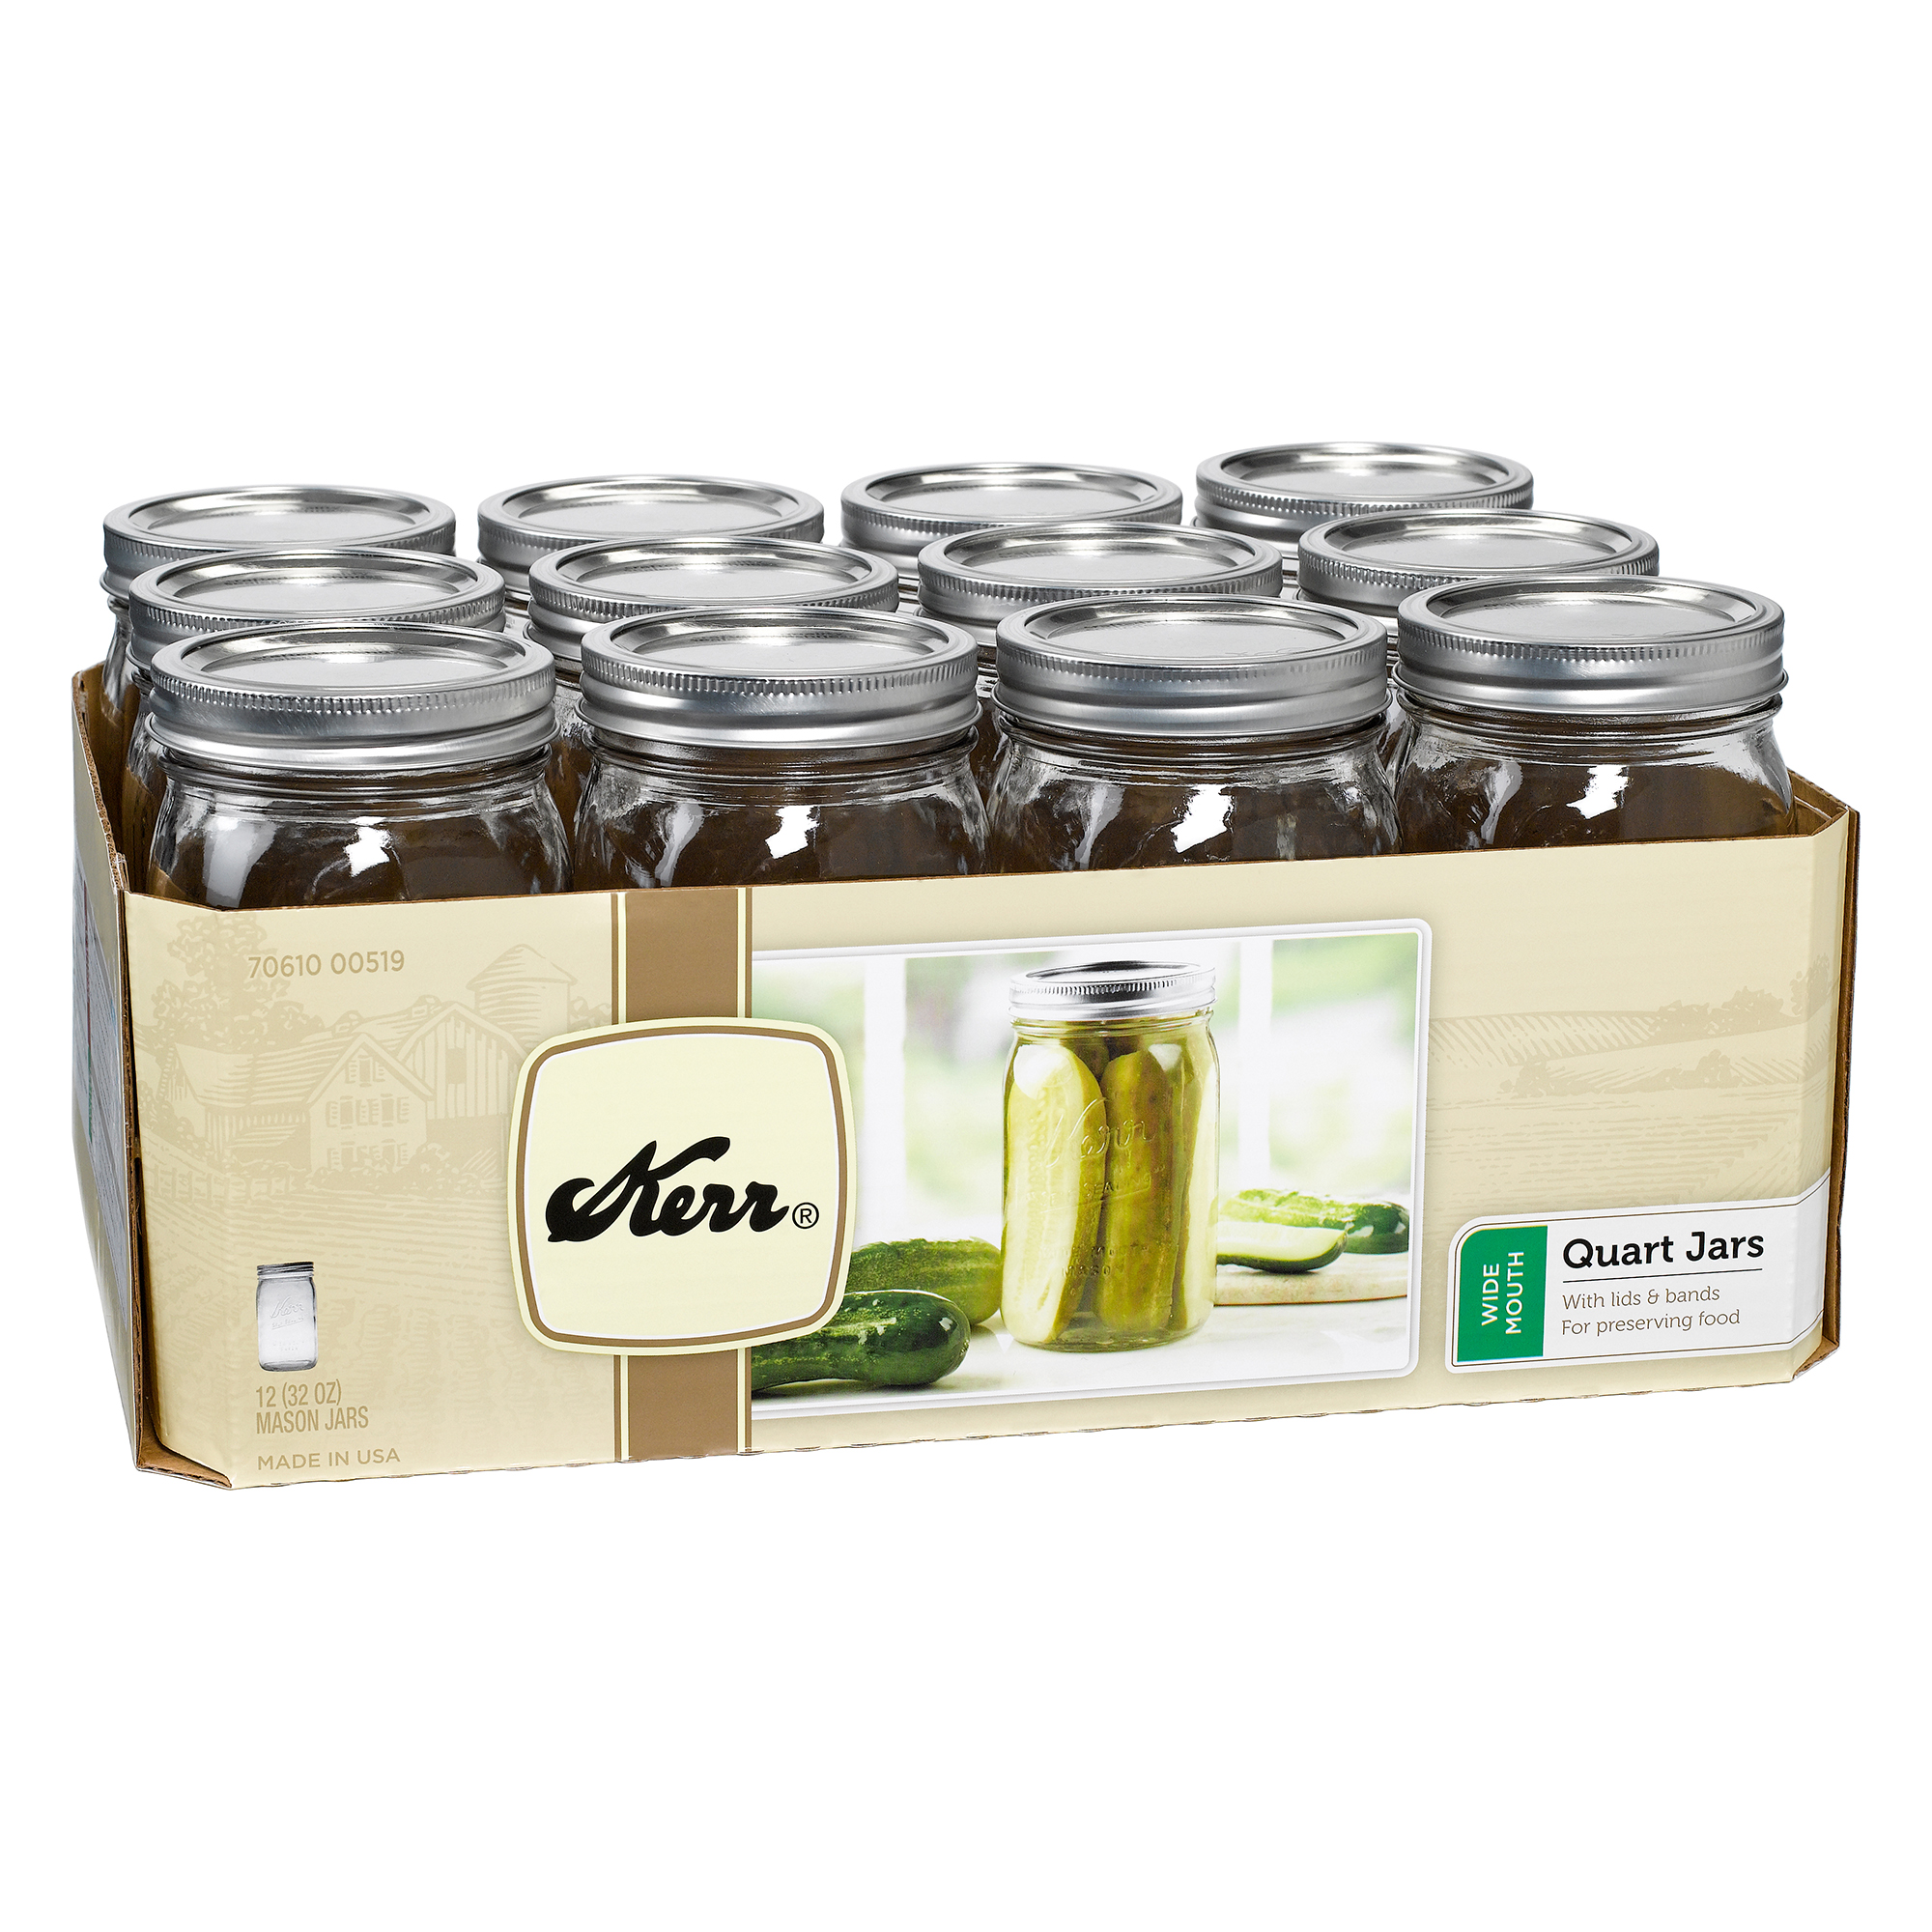 Kerr, Glass Mason Jars with Lids & Bands, Wide Mouth, 32 oz, 12 Count - image 1 of 5